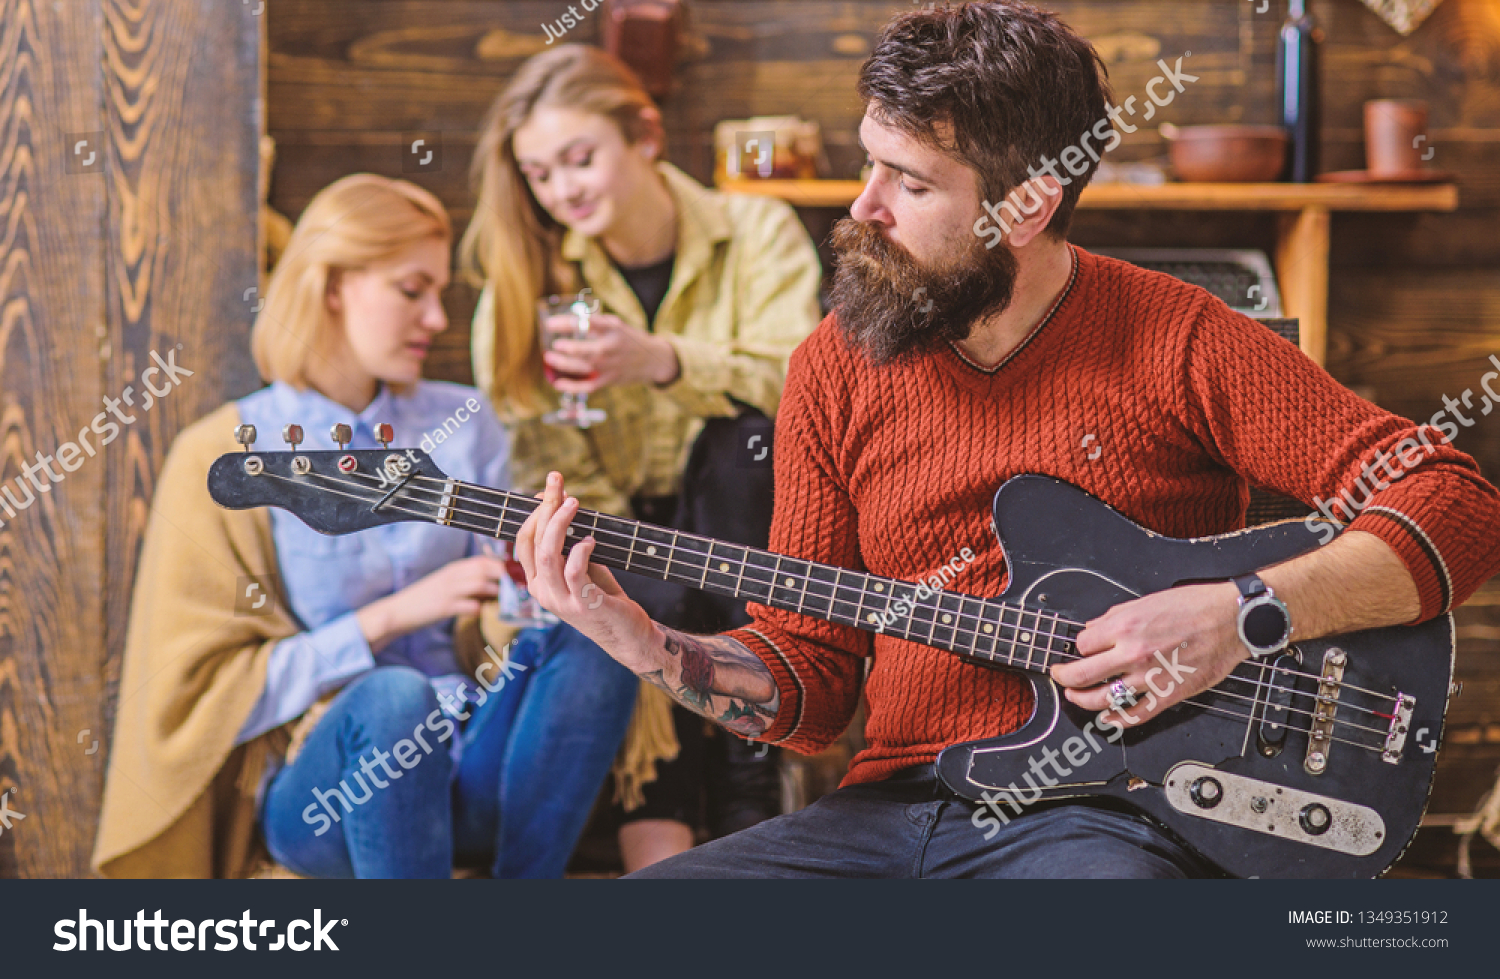 Girls listening to song performed by handsome bearded musician. Guitarist entertaining guests at party. Man with hipster beard playing electrical guitar. Bearded man united with his instrument. #1349351912